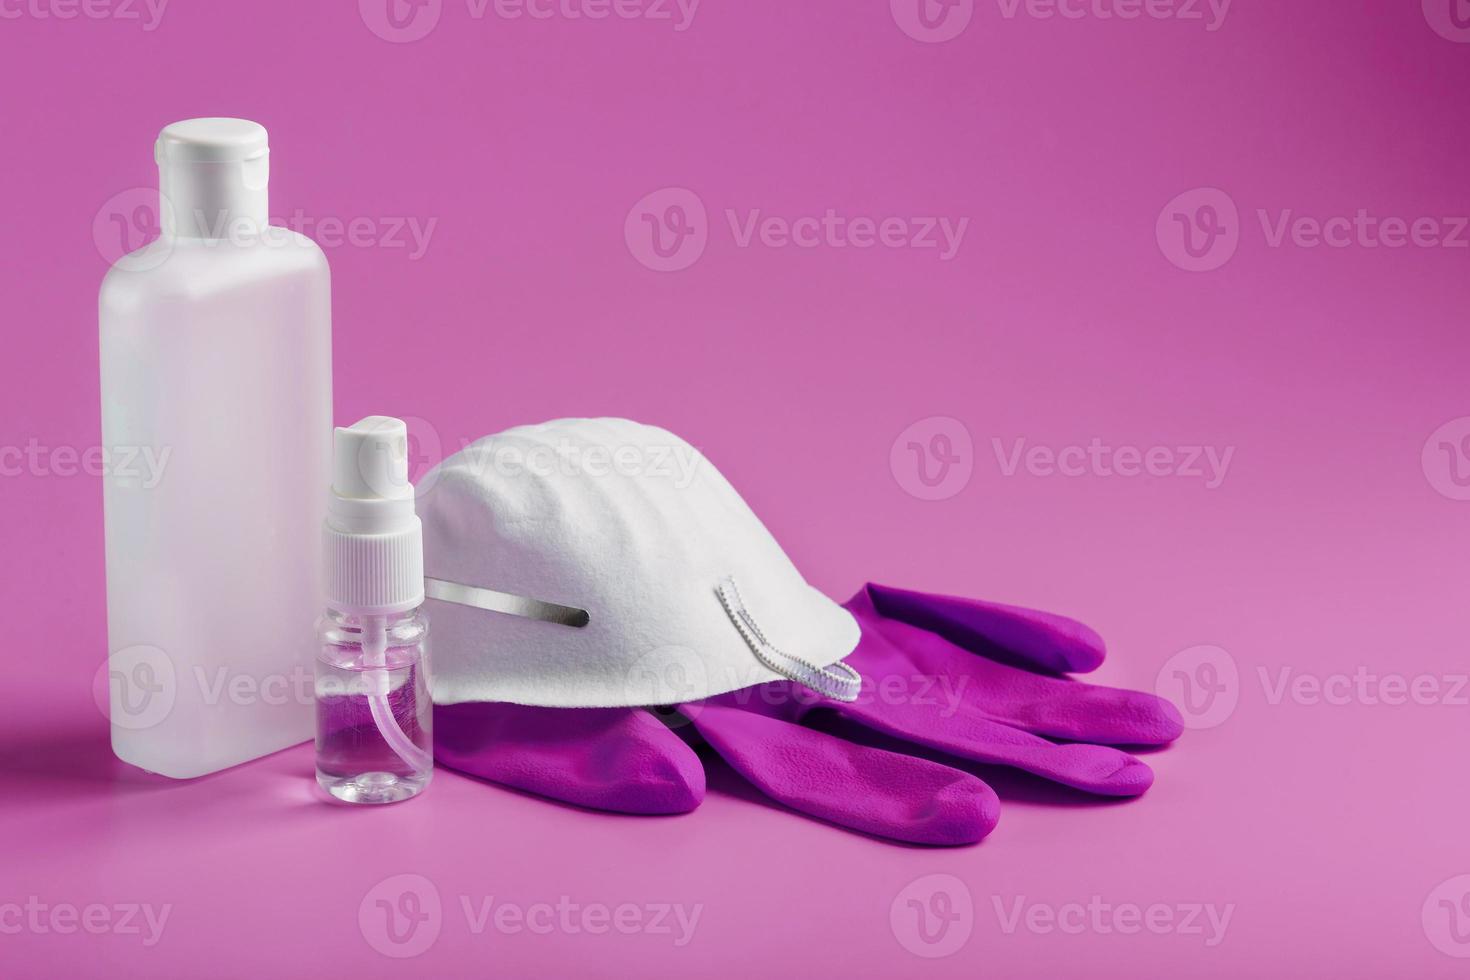 Anti-virus protection kit on a pink background, mask, rubber gloves, bottles of hand sanitizer, antiseptic gel. Isolate photo